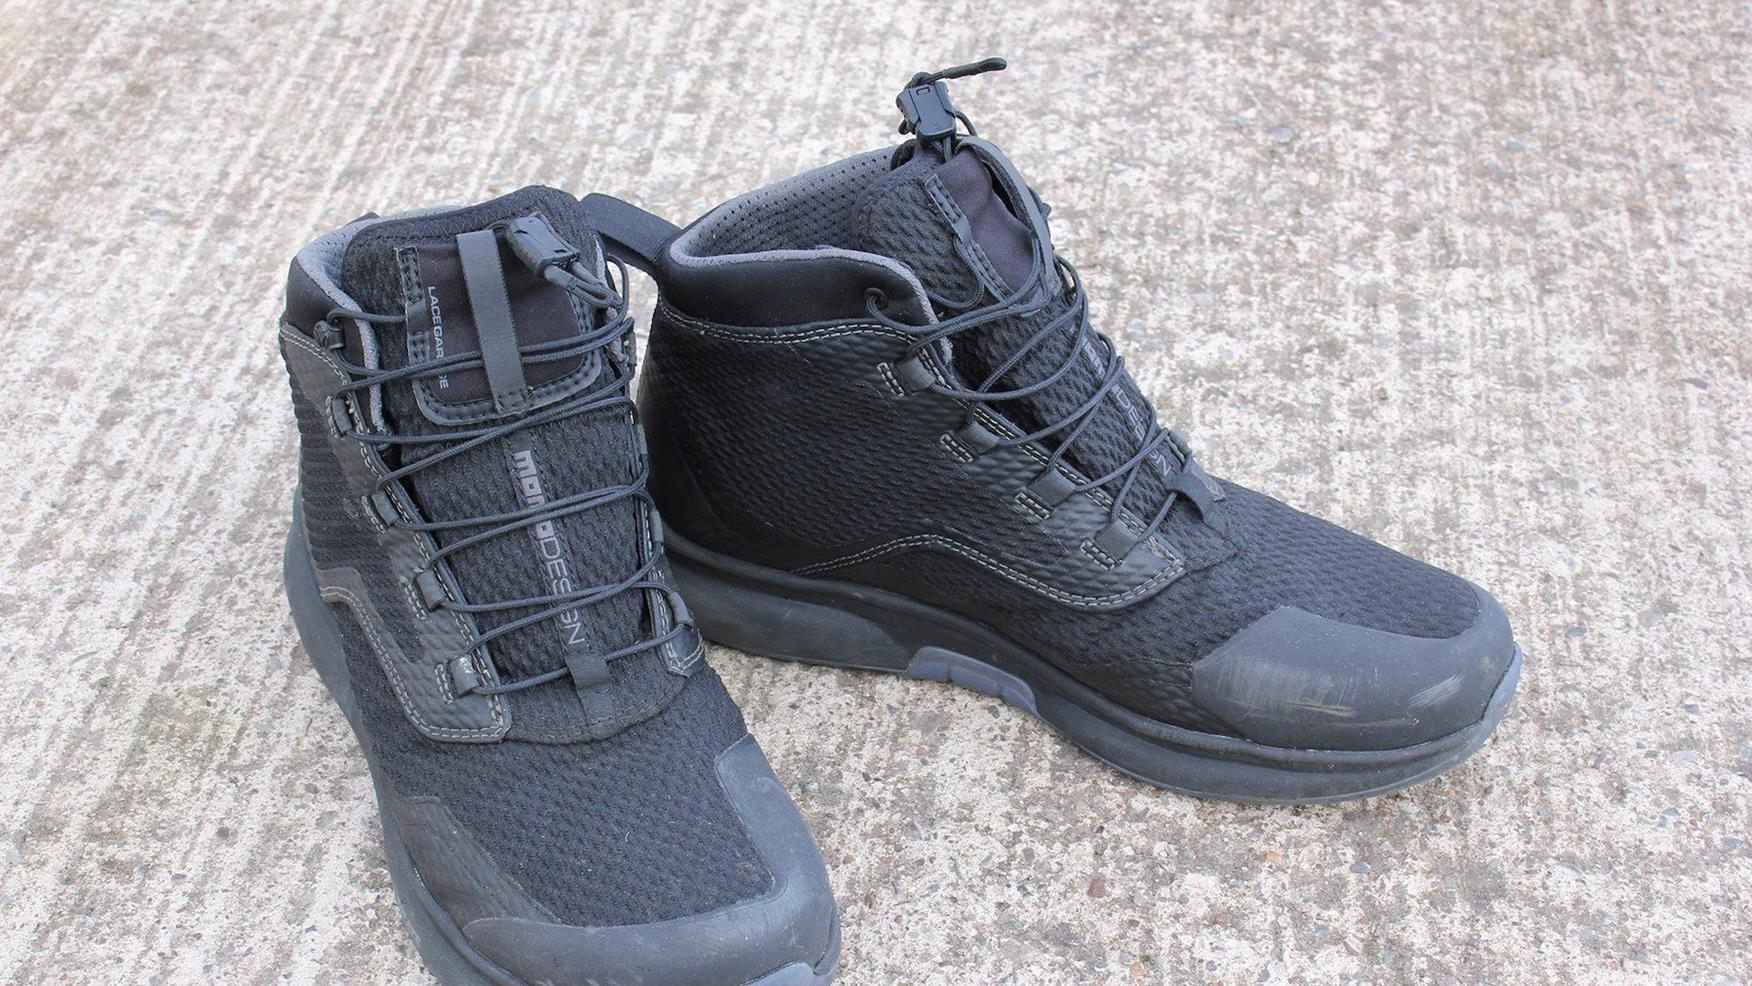 Tried and tested: Momo Firegun 3 boots review